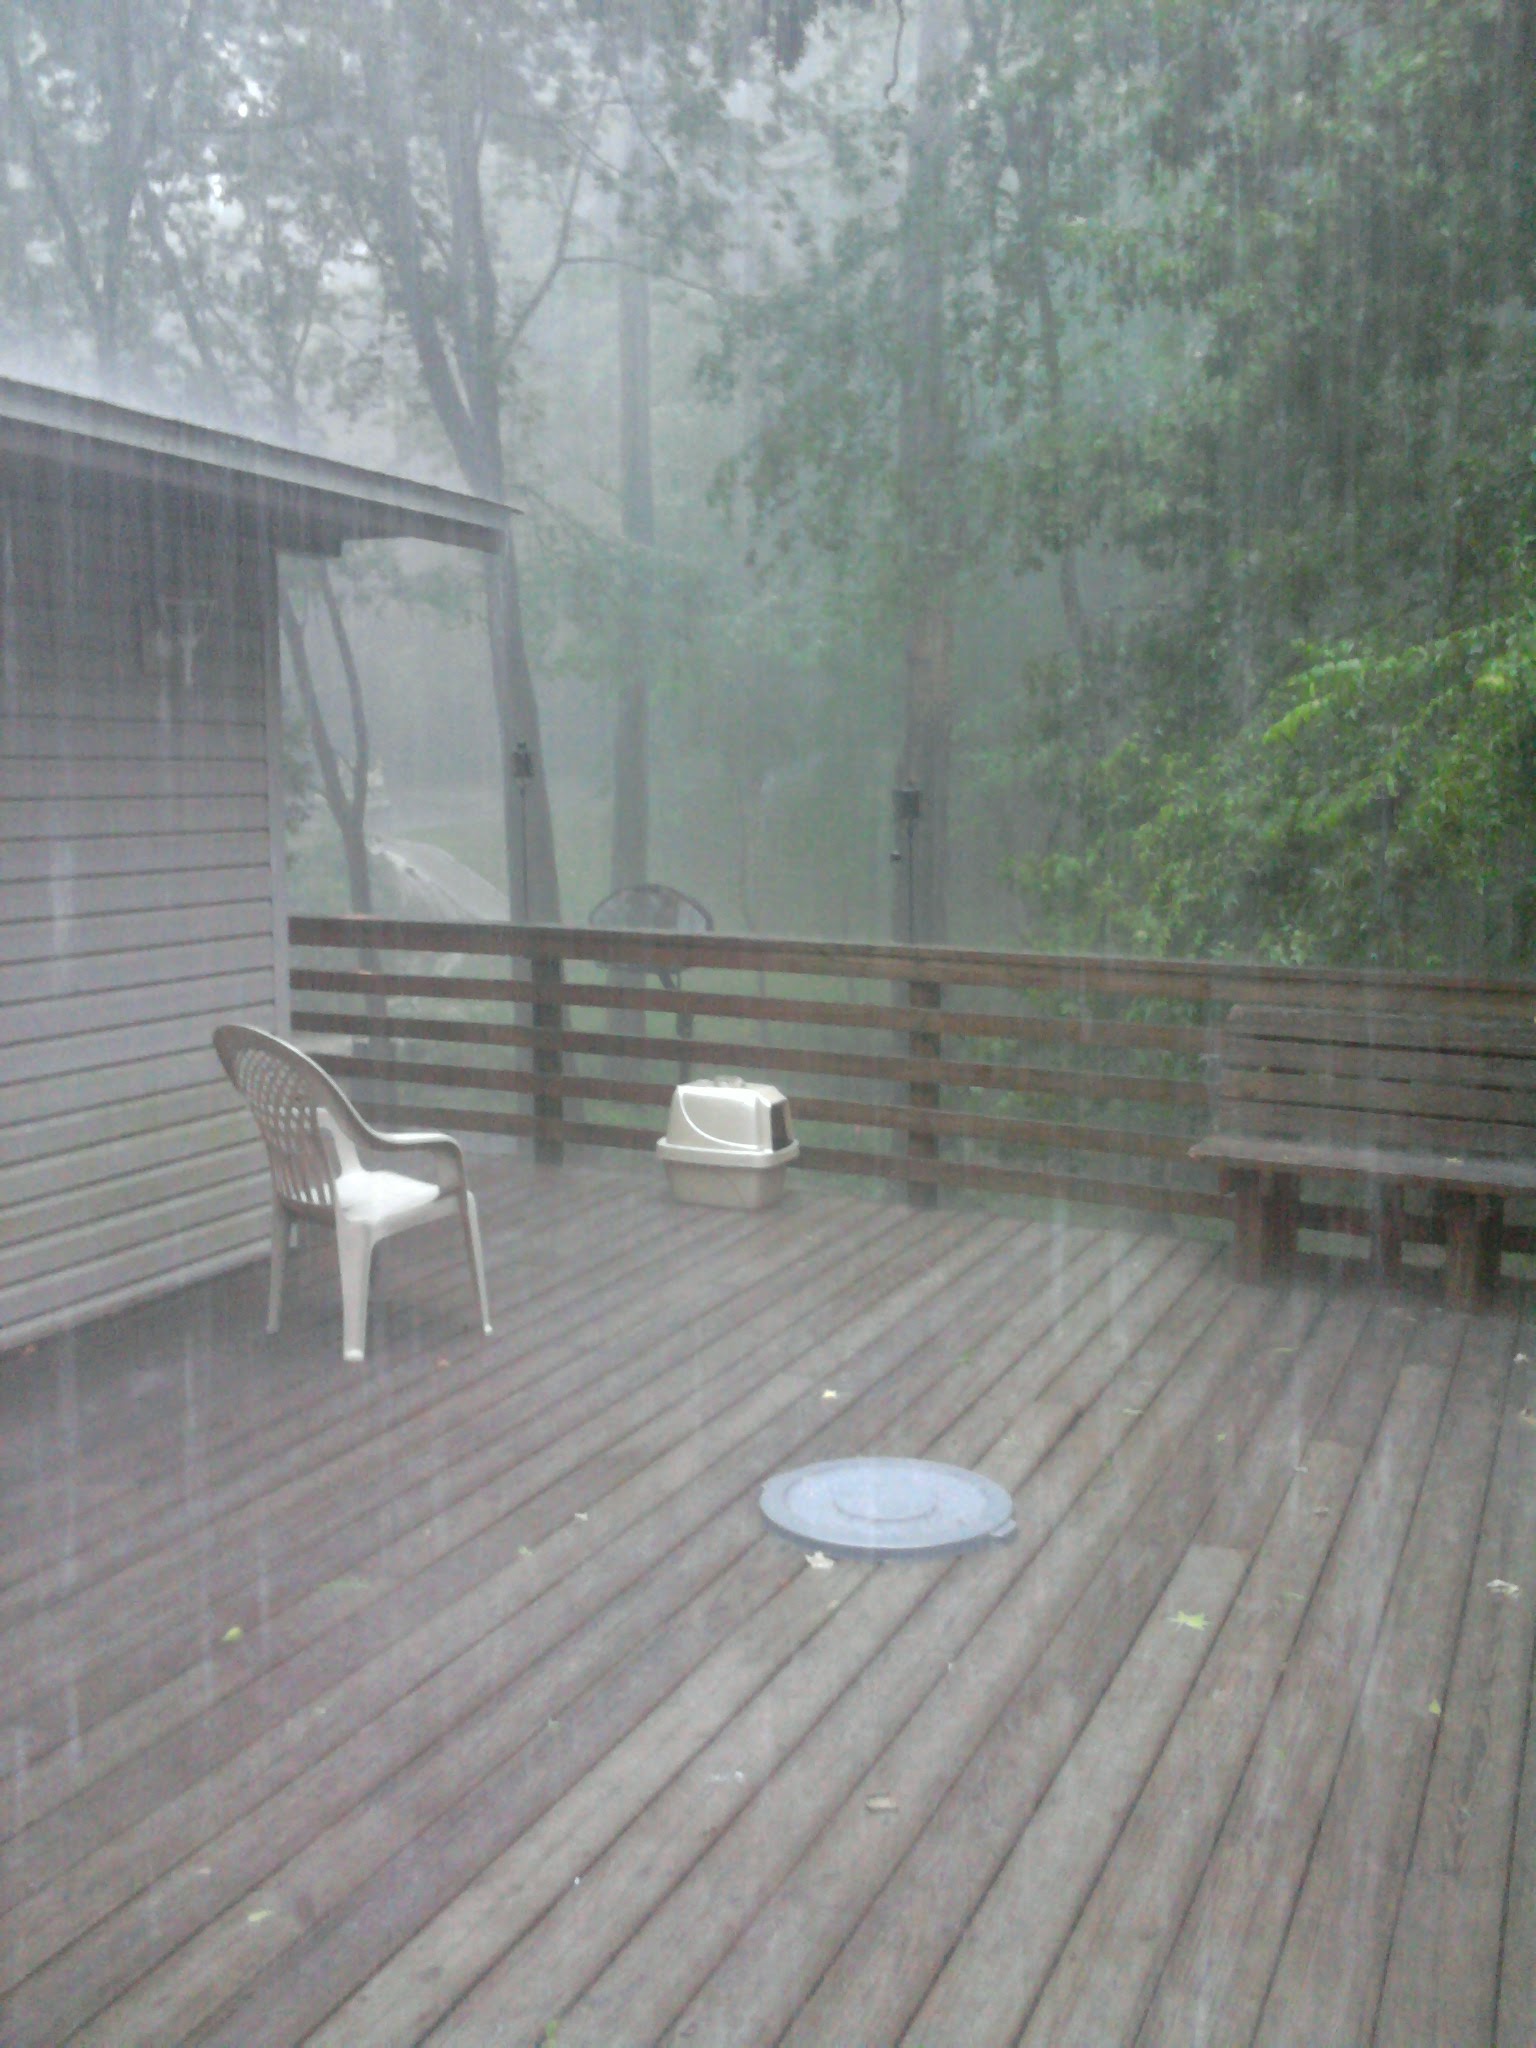 Image shows a deck in heavy rain. Beyond the deck is a waterfall caused by stormwater runoff